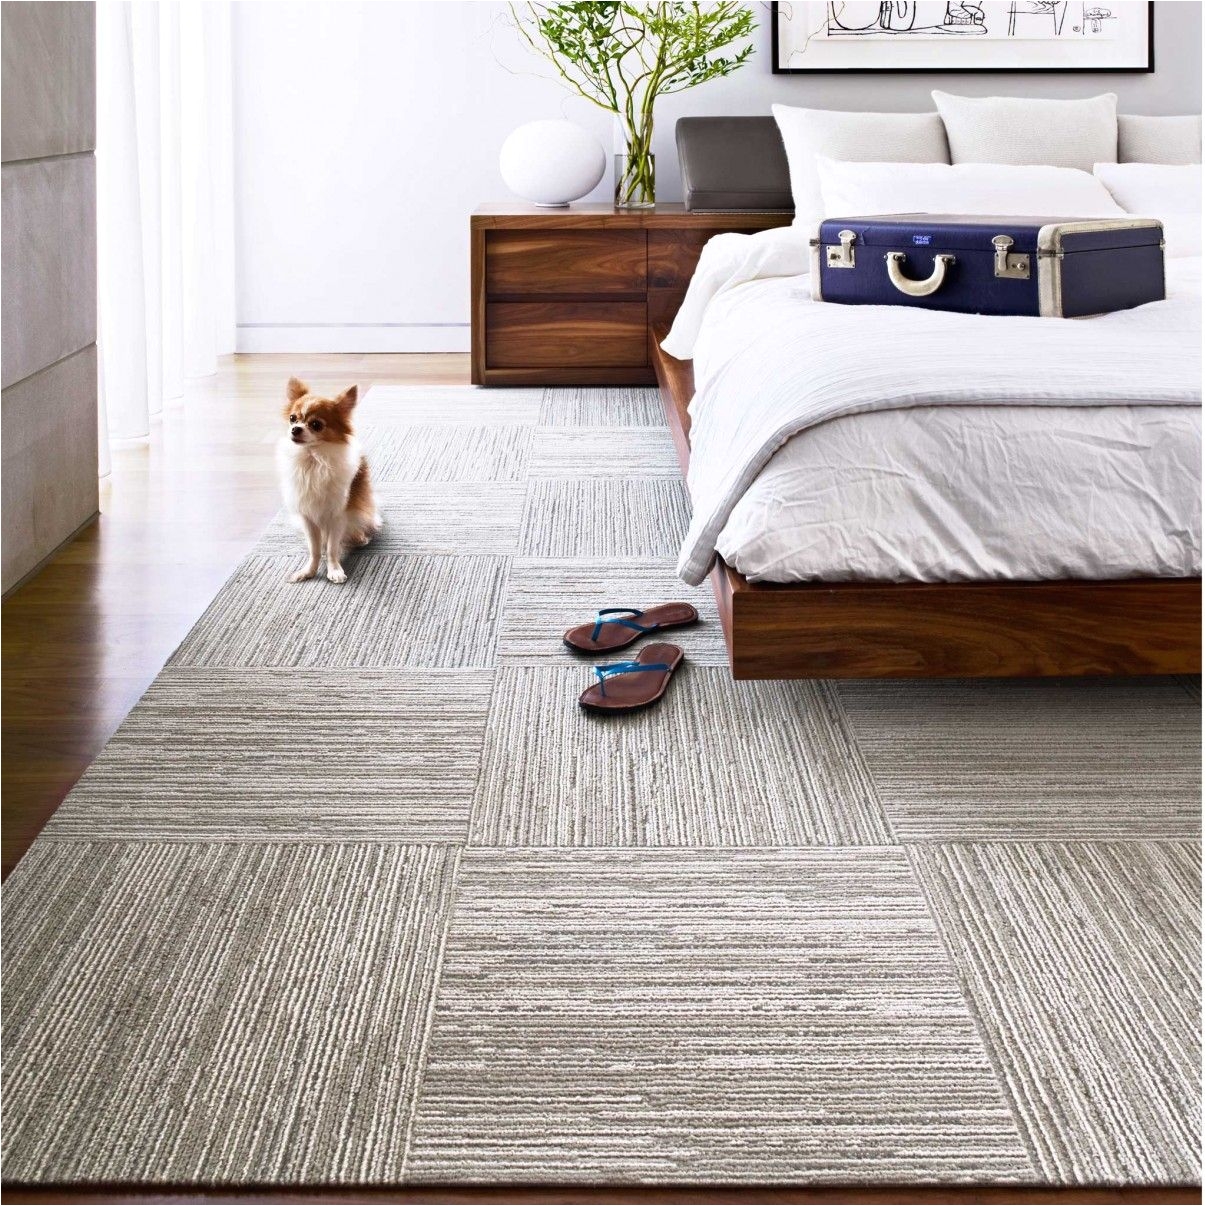 flor lacebark carpet tiles i like the patchwork detail yet soothing neutrals especially for a bedroom